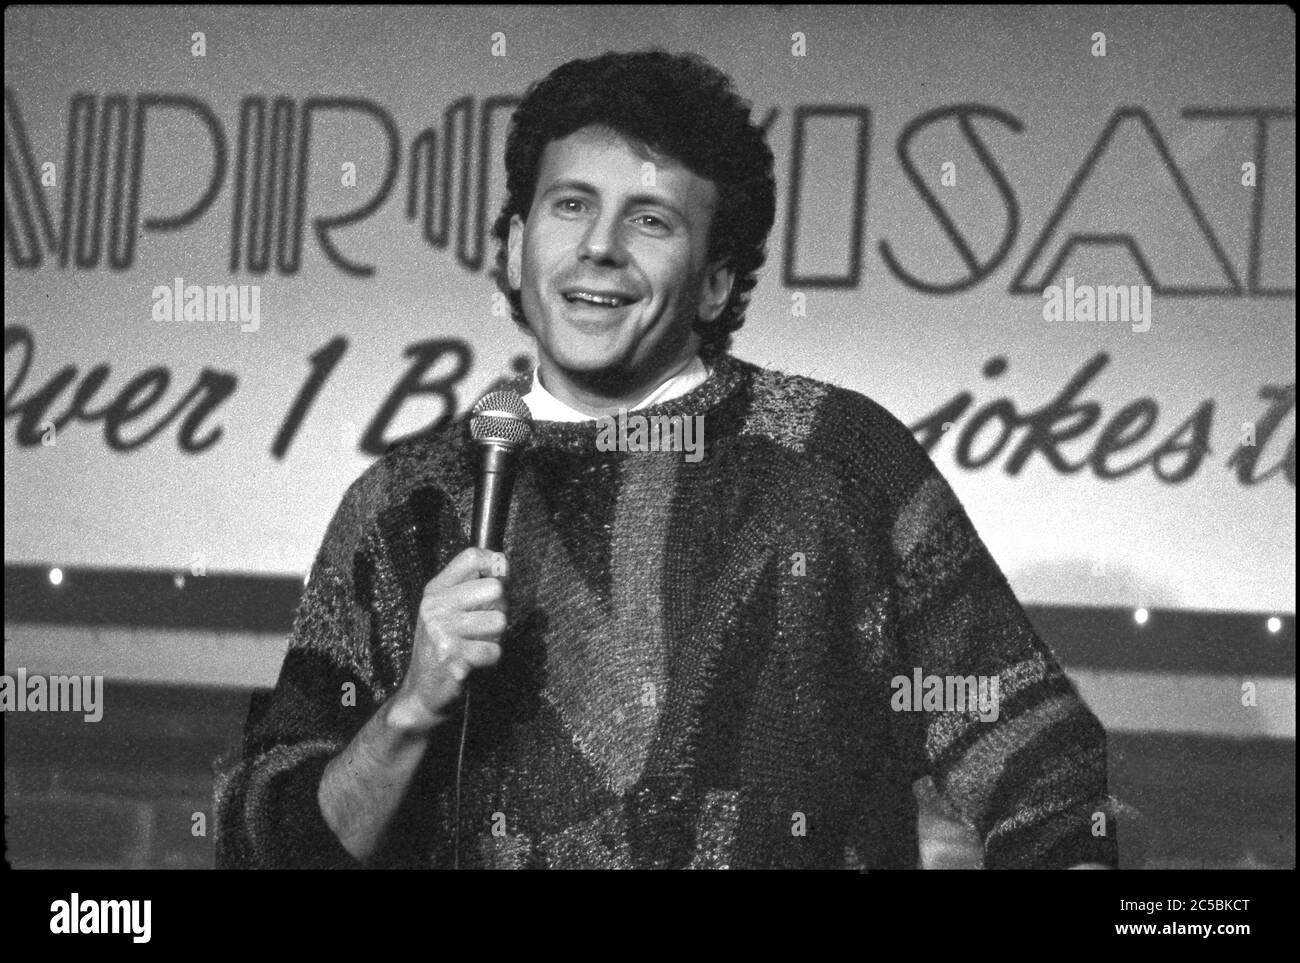 Comedian Paul Reiser performing stand up comedy at the Improv Theater in Werst Hollywood, CA circa 1980s Stock Photo